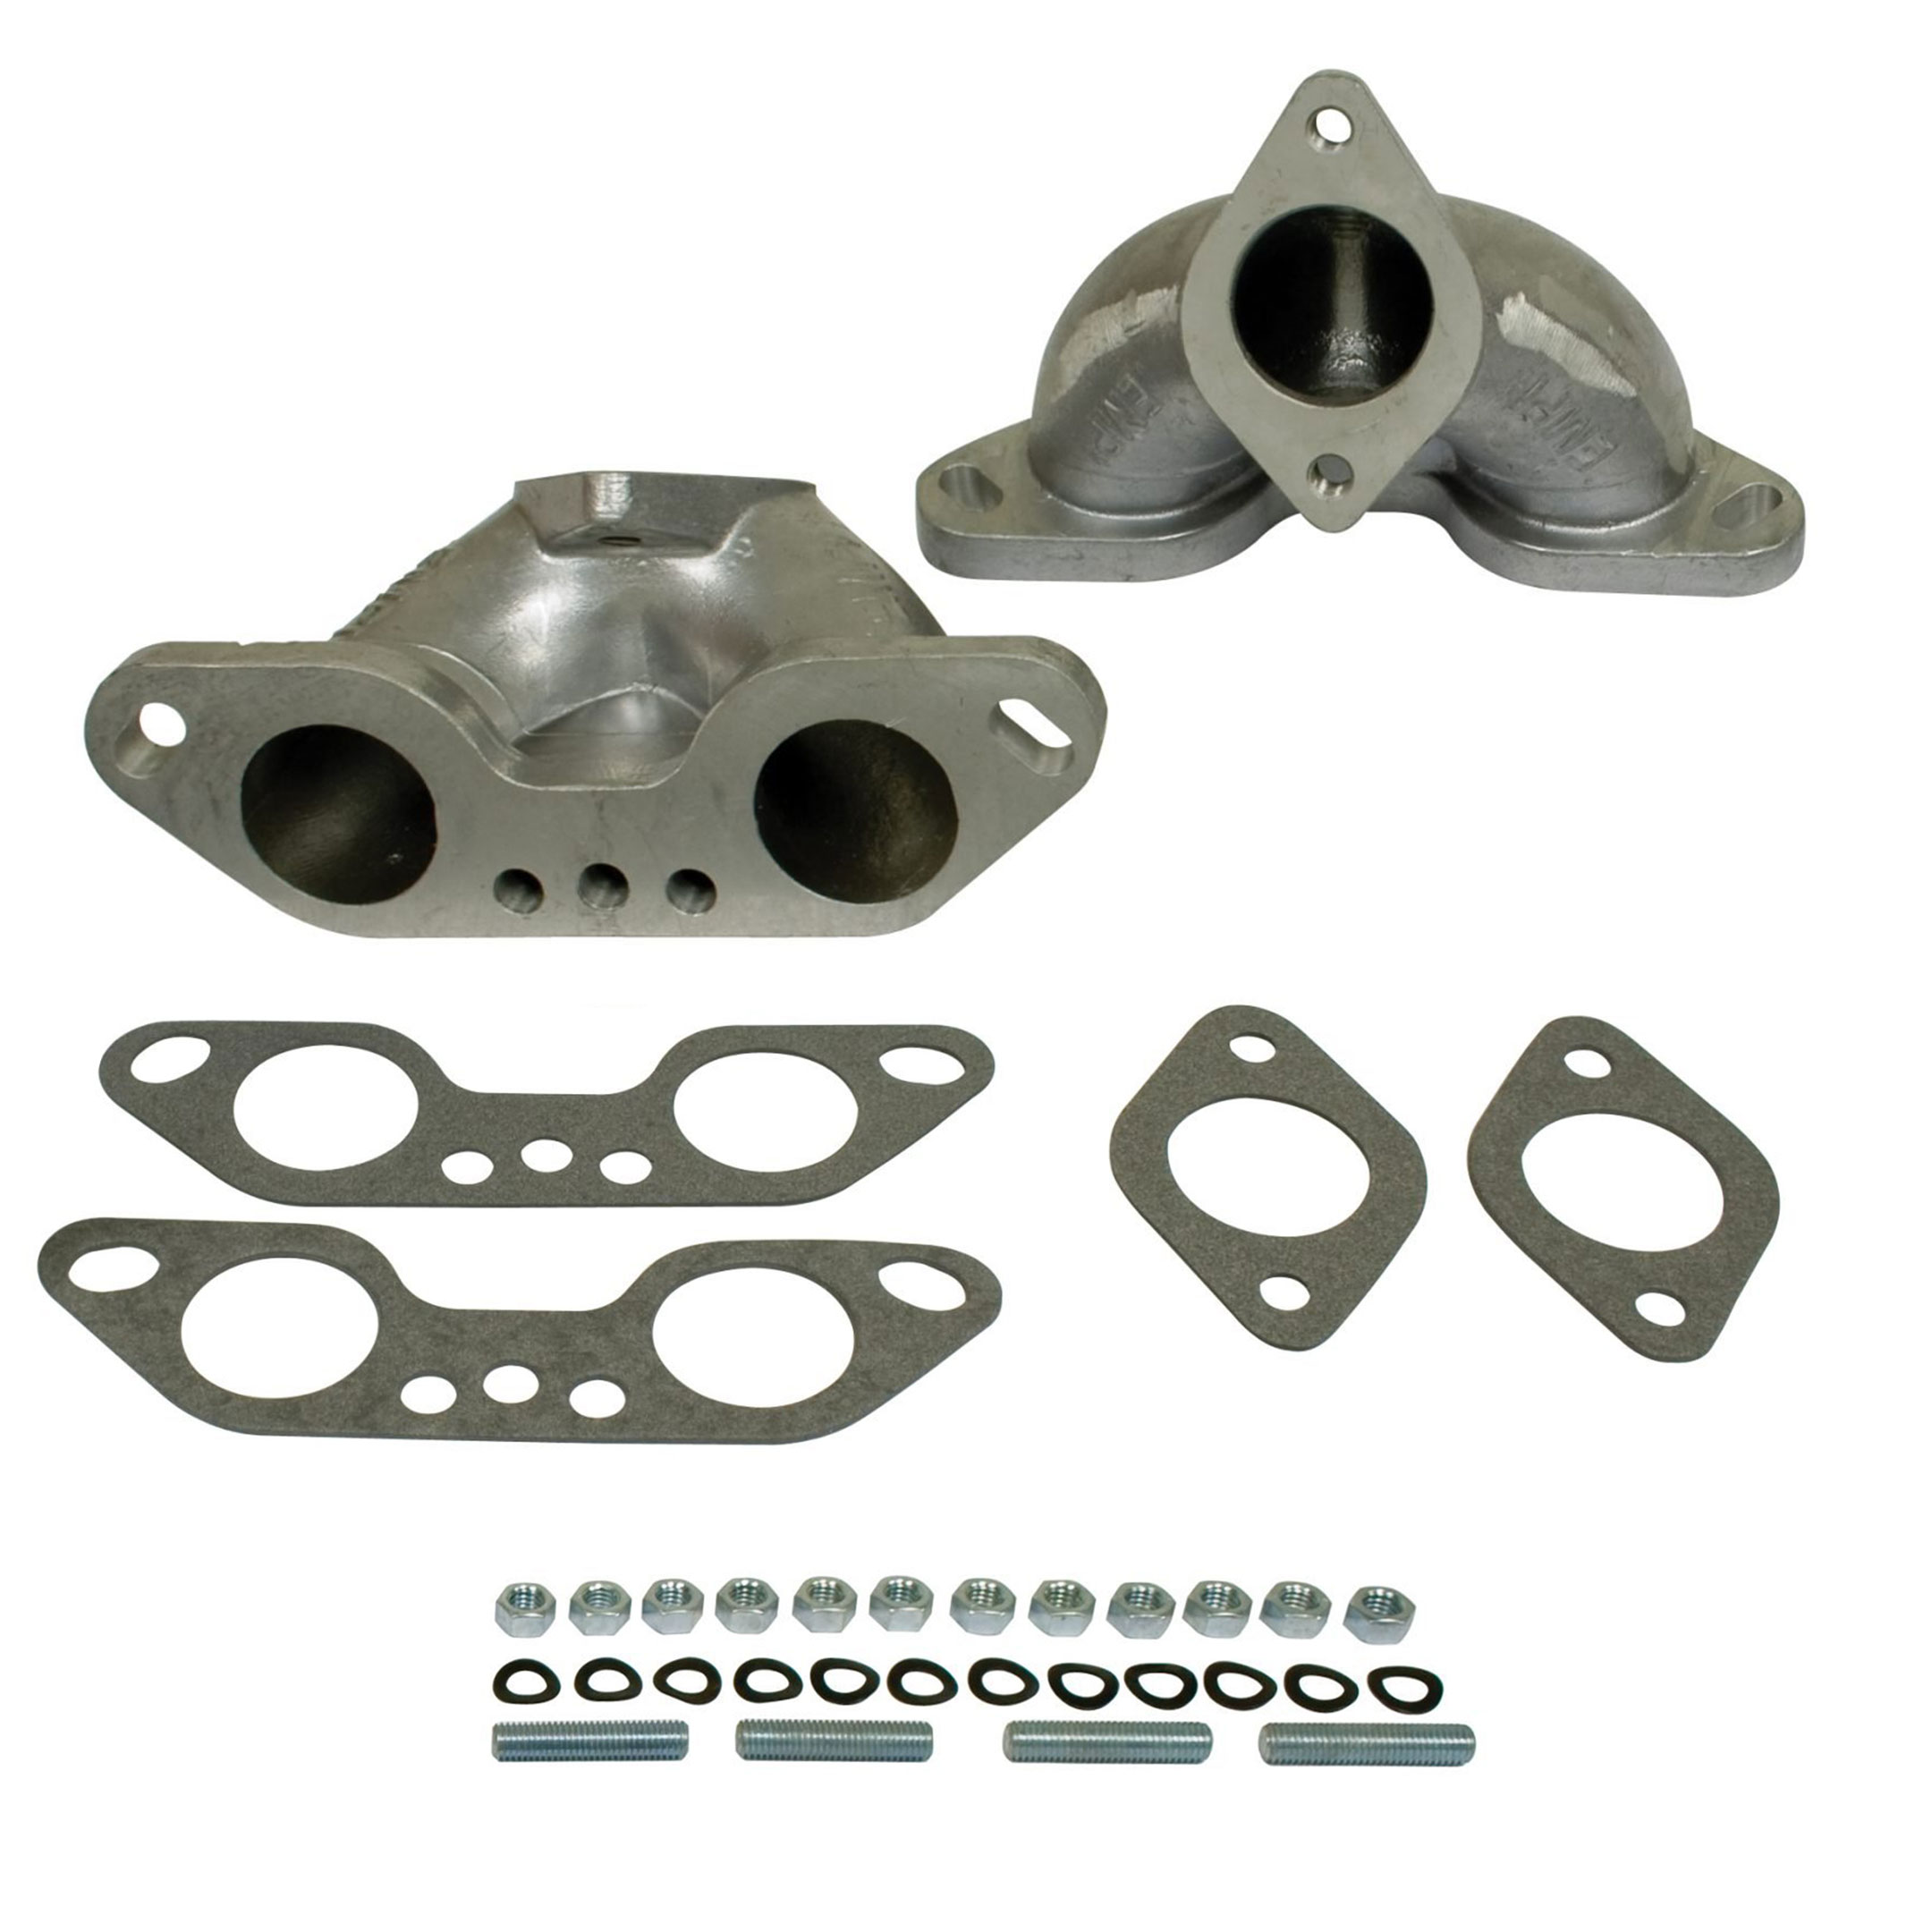 VW Manifold Kit - EPC 34 or 34 ICT - for Type 2/4